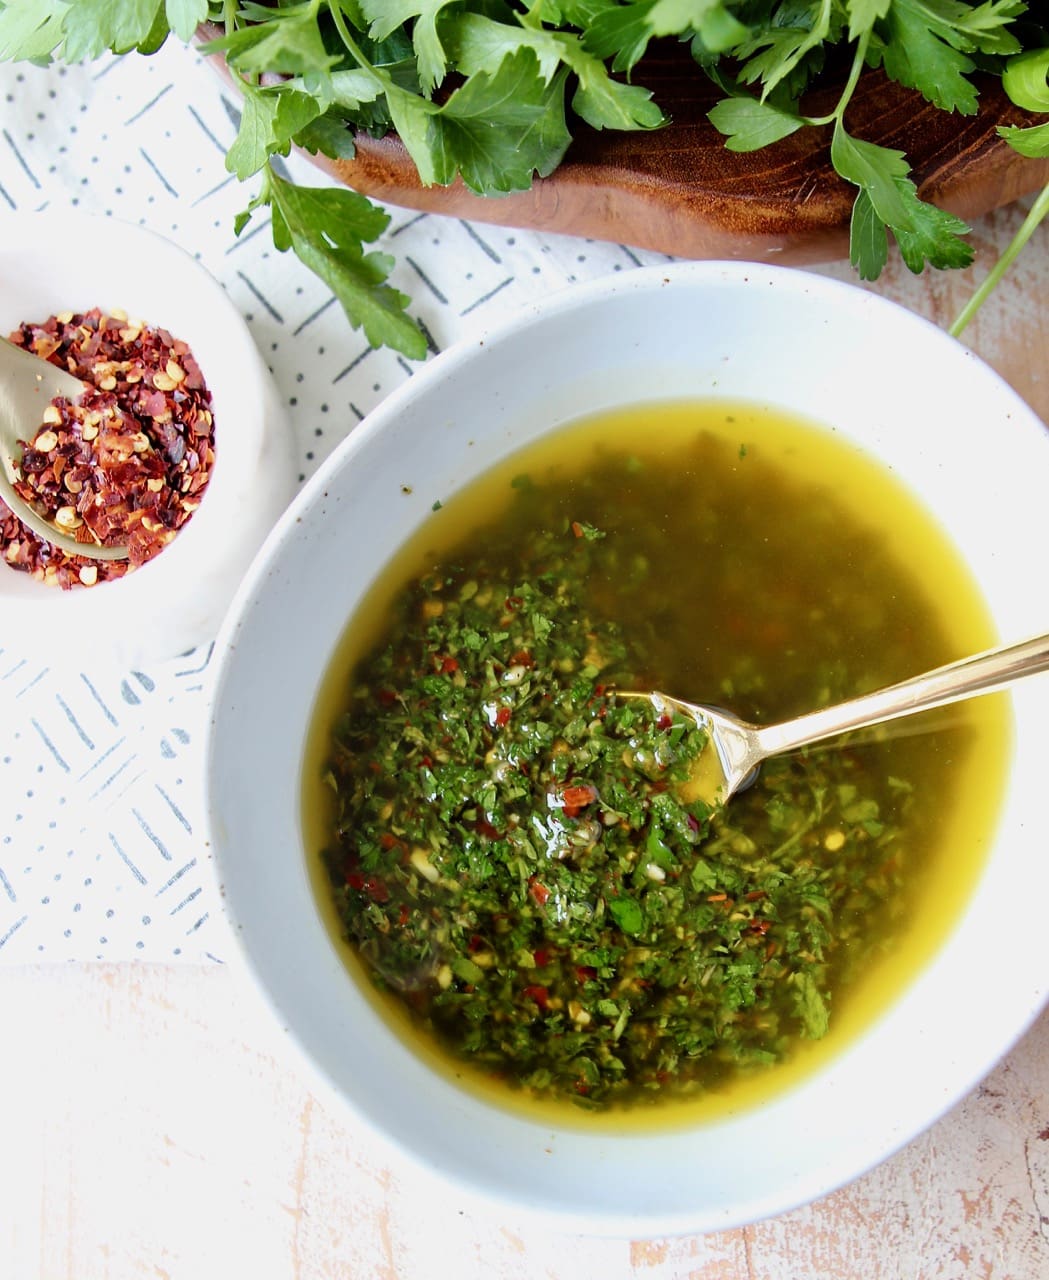 Vegan Chimichurri Recipe with Red Pepper Flakes and Parsley